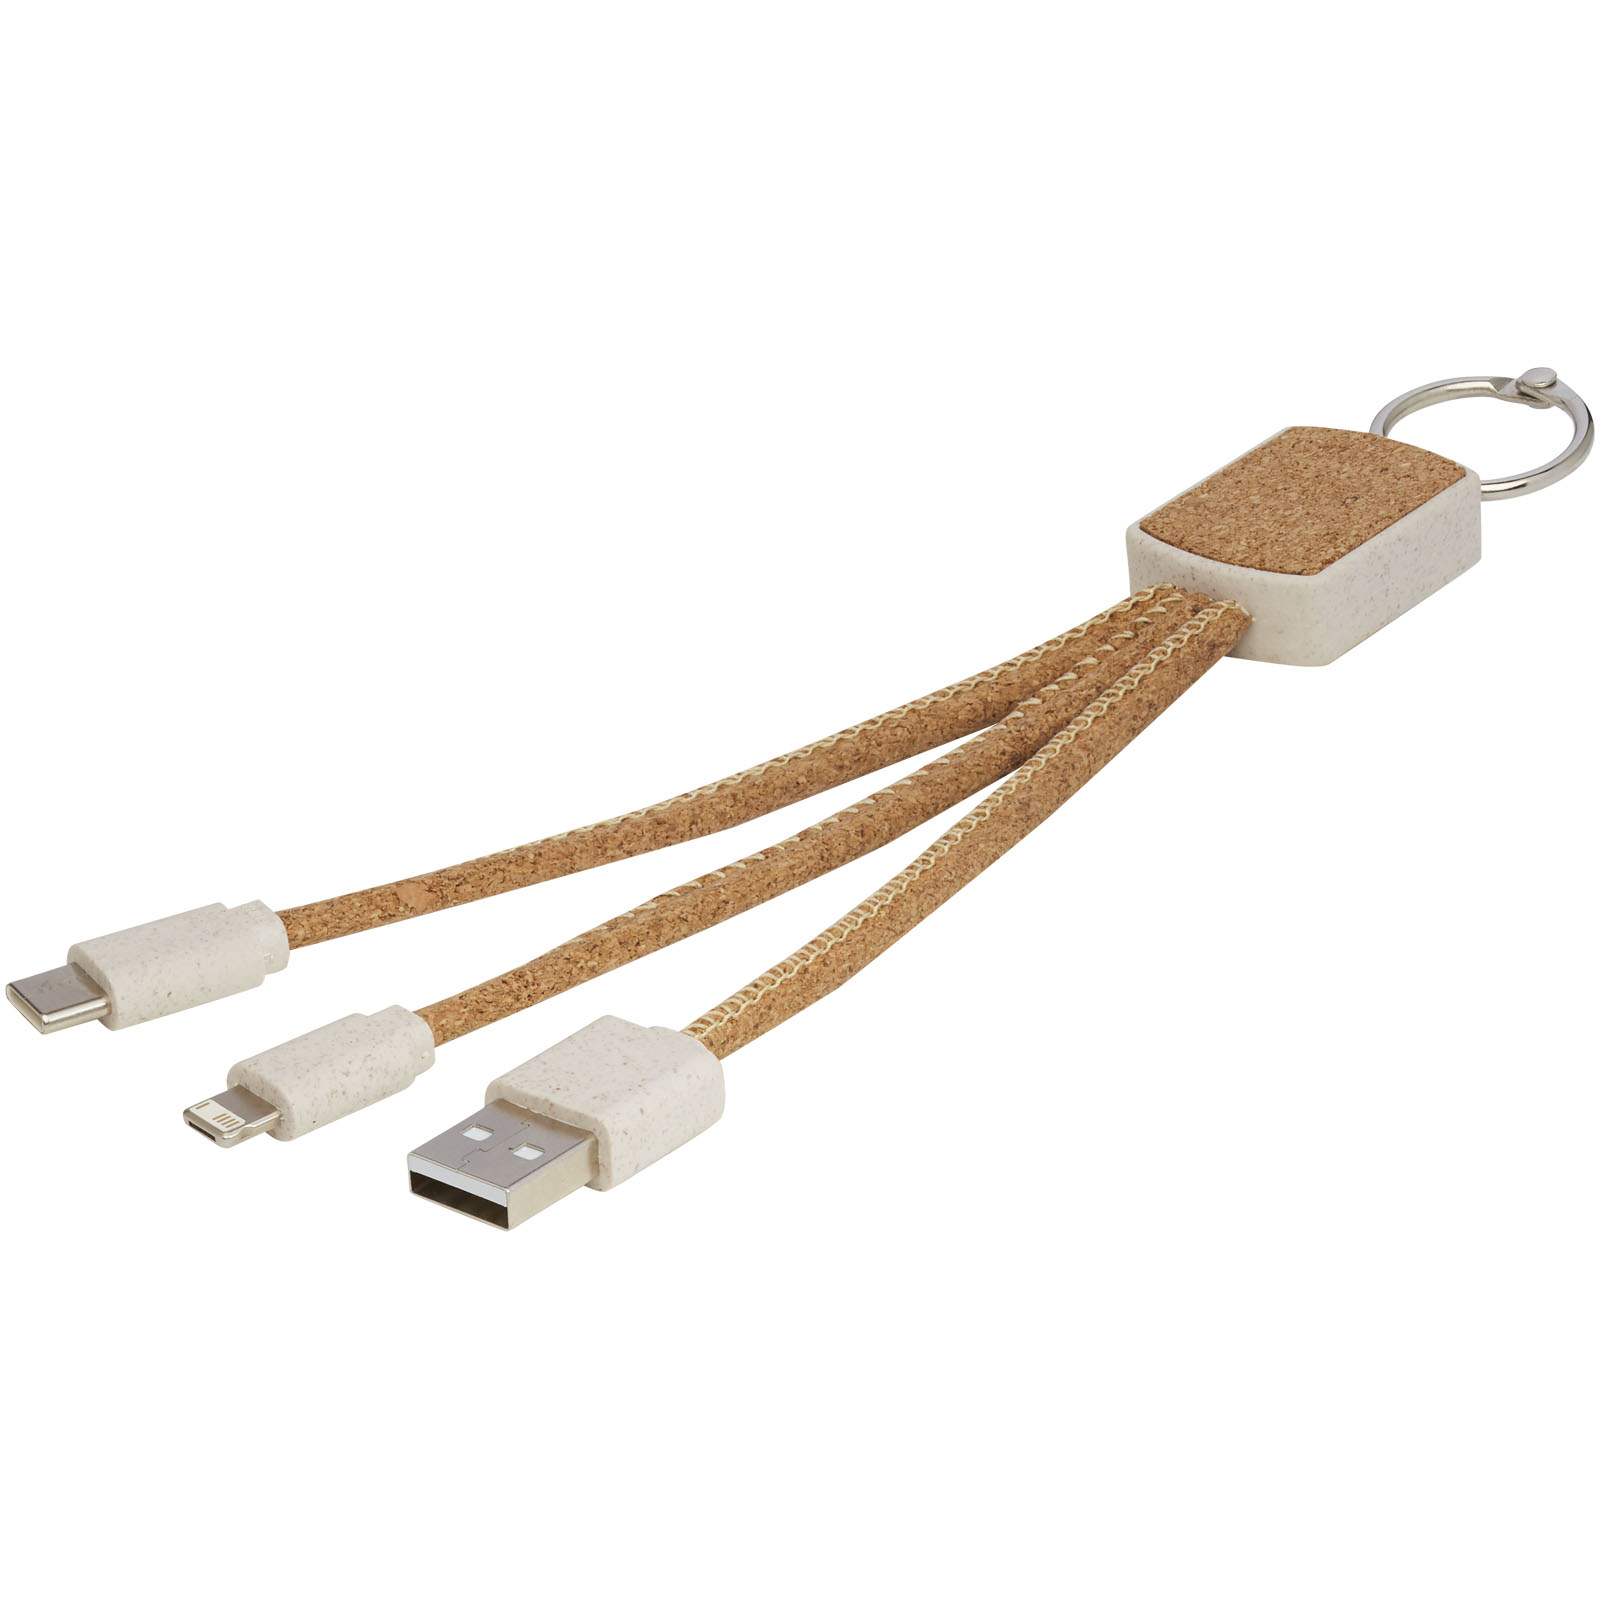 Advertising Cables - Bates wheat straw and cork 3-in-1 charging cable